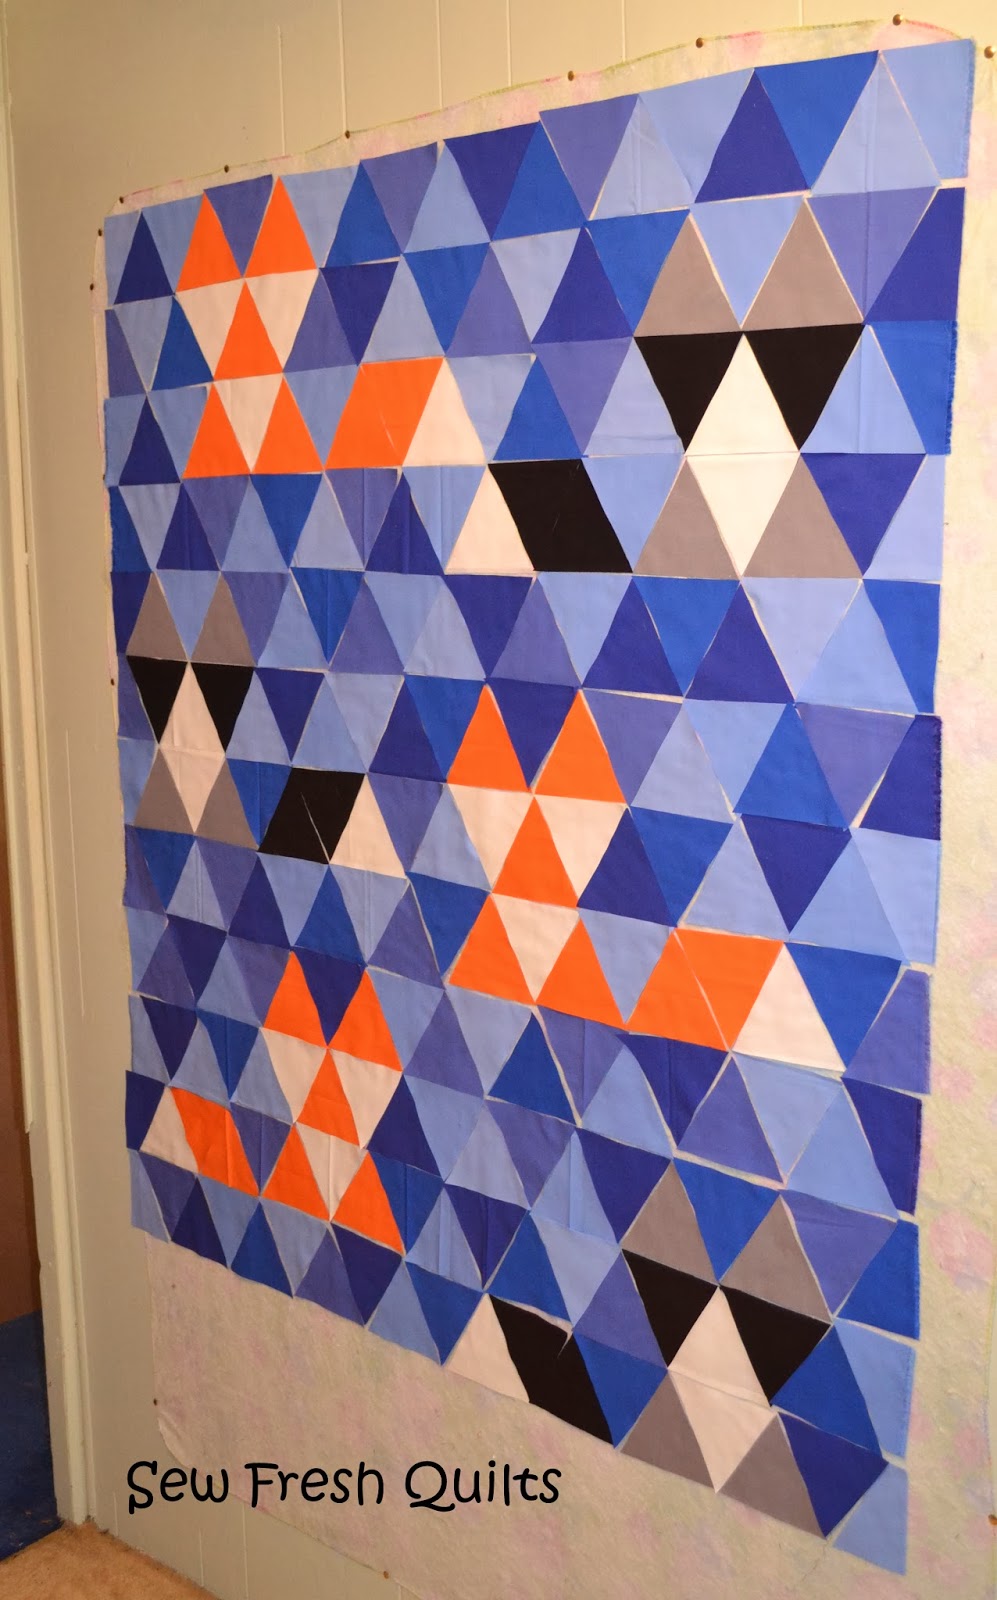 Download Sew Fresh Quilts: Equilateral Triangle Quilt Tutorial - Part 2